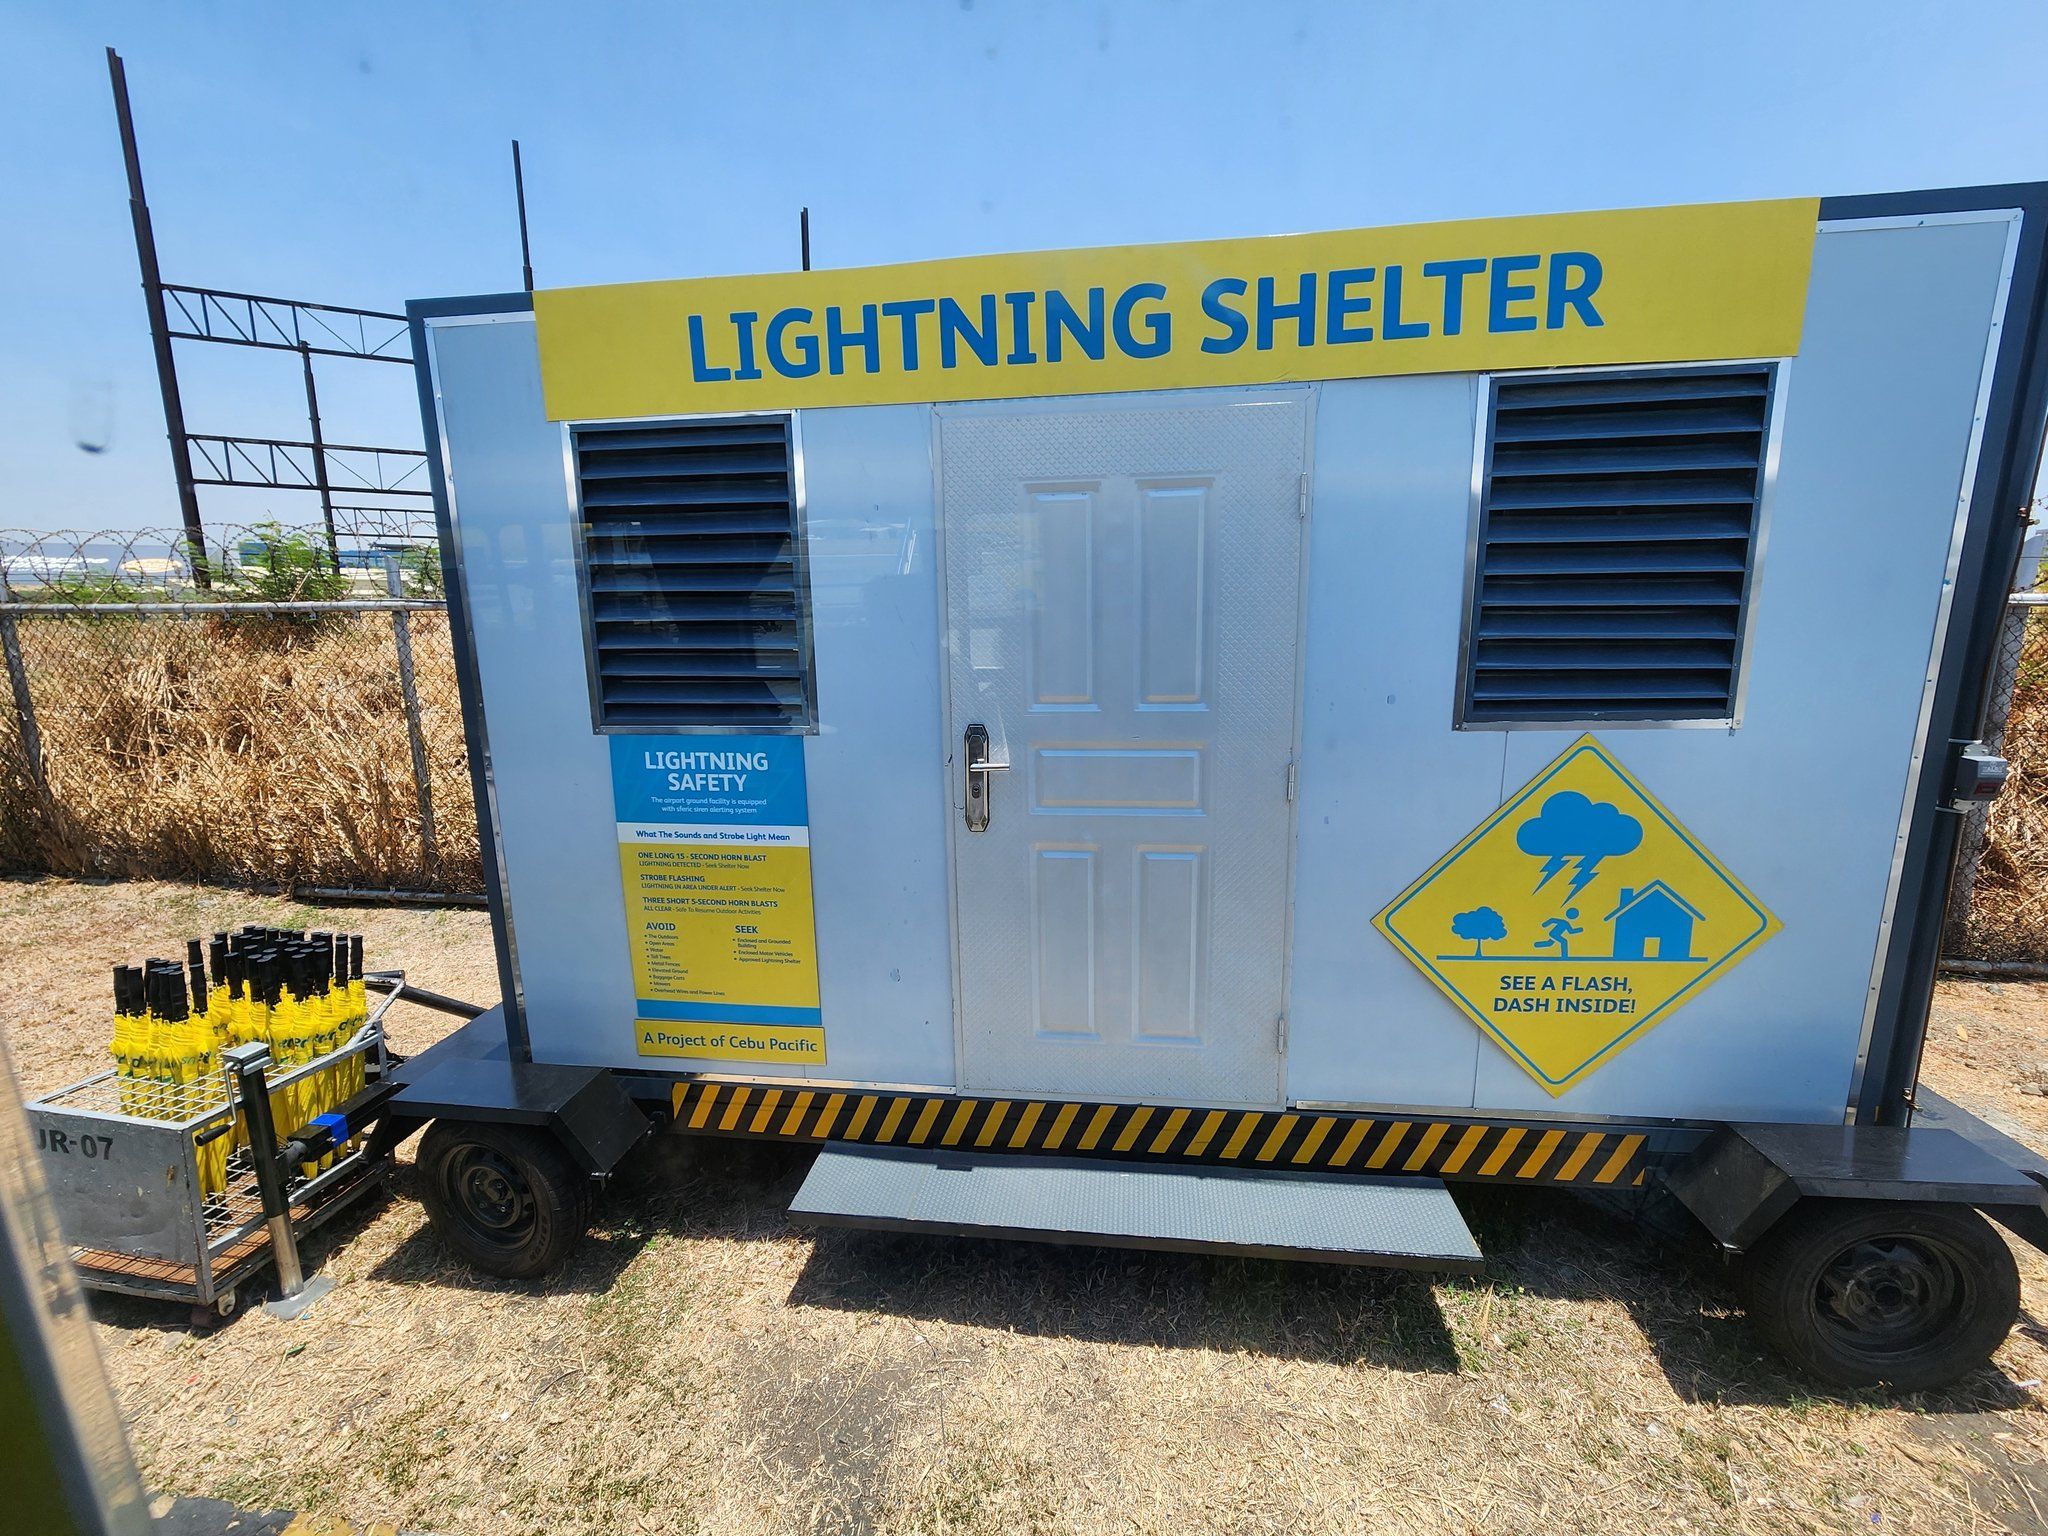 Lightning shelters for airport workers